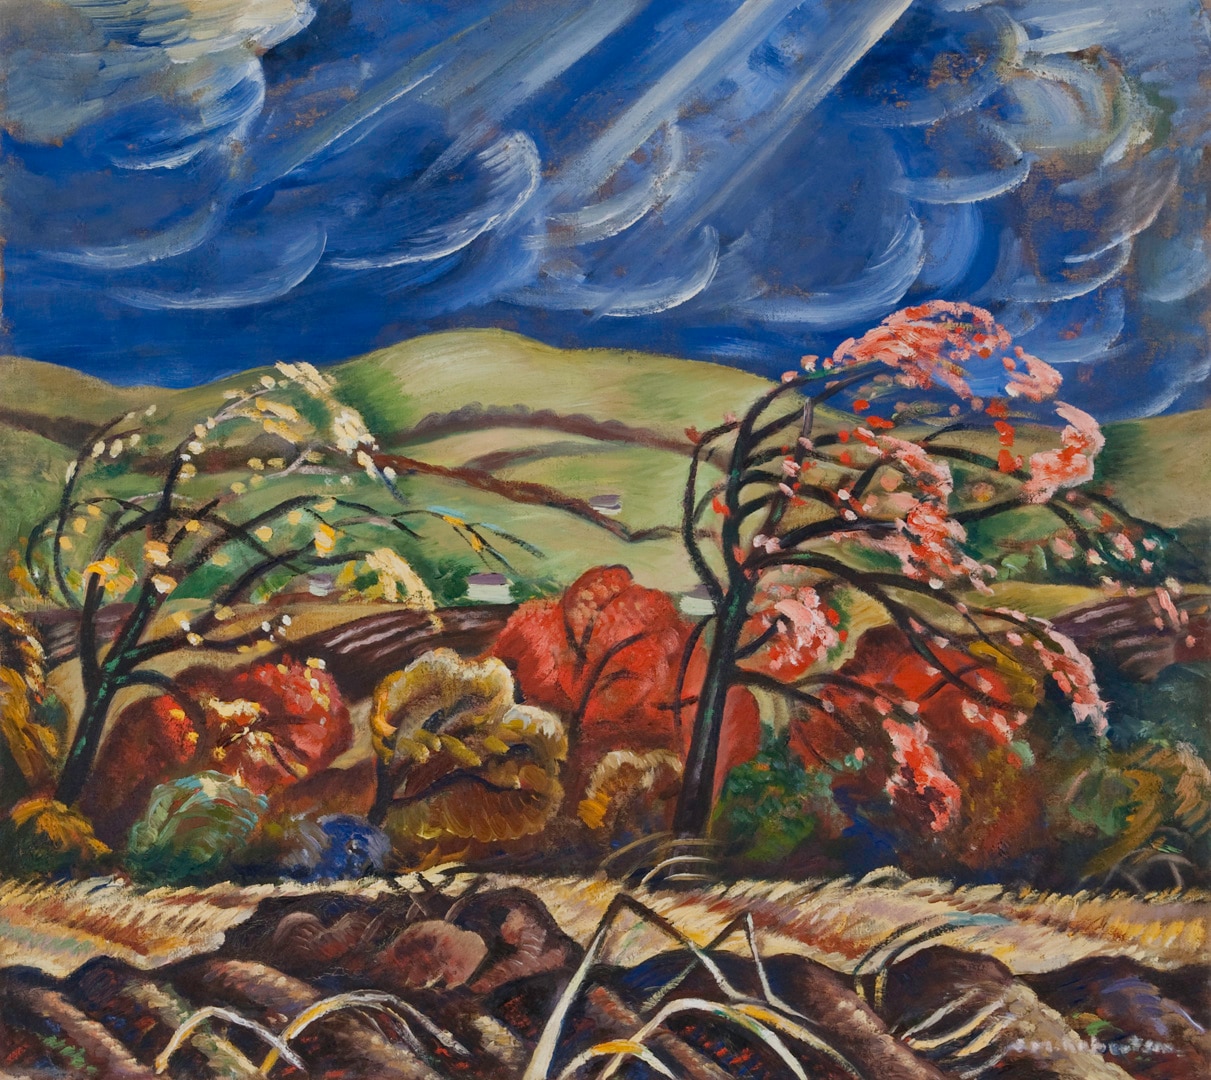 Sarah Robertson, Montreal QC 1891–Montreal QC 1948, October, Ottawa Valley, around 1937, oil on canvas. Purchase, Chancellor Richardson Memorial Fund and Wintario matching grant, 1978 (21-029) Photo: Paul Litherland